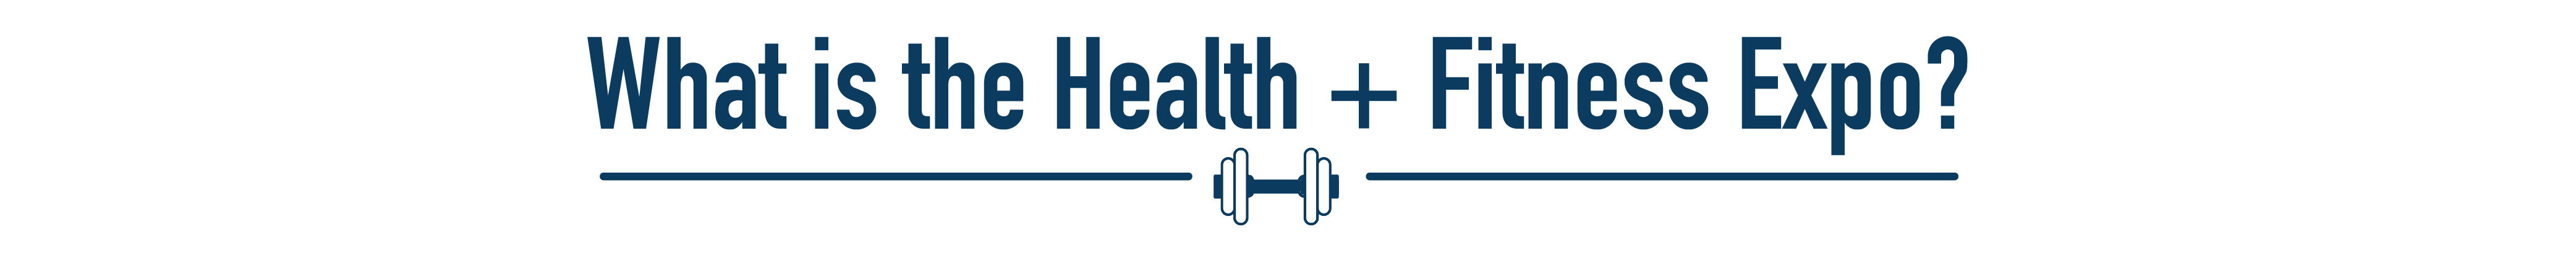 What is the Idaho Health + Fitness Expo